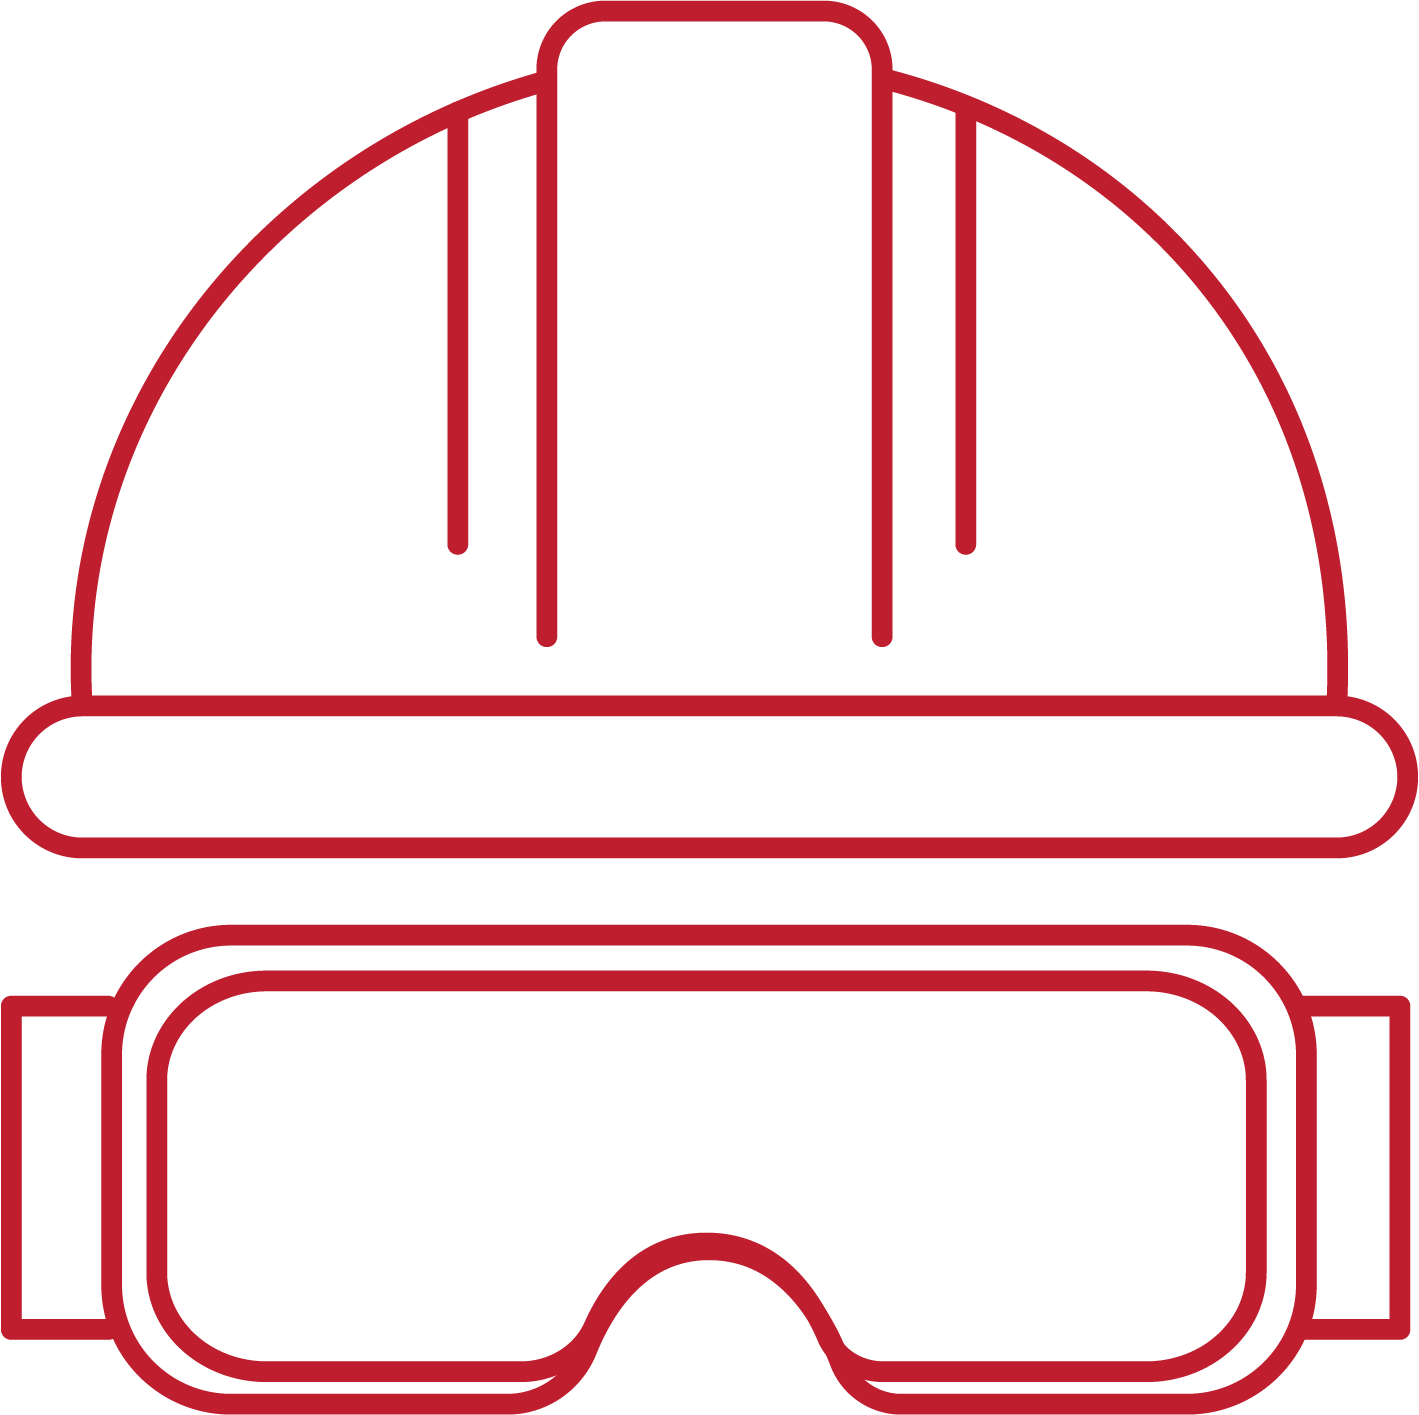 hard hat and safety goggles icon